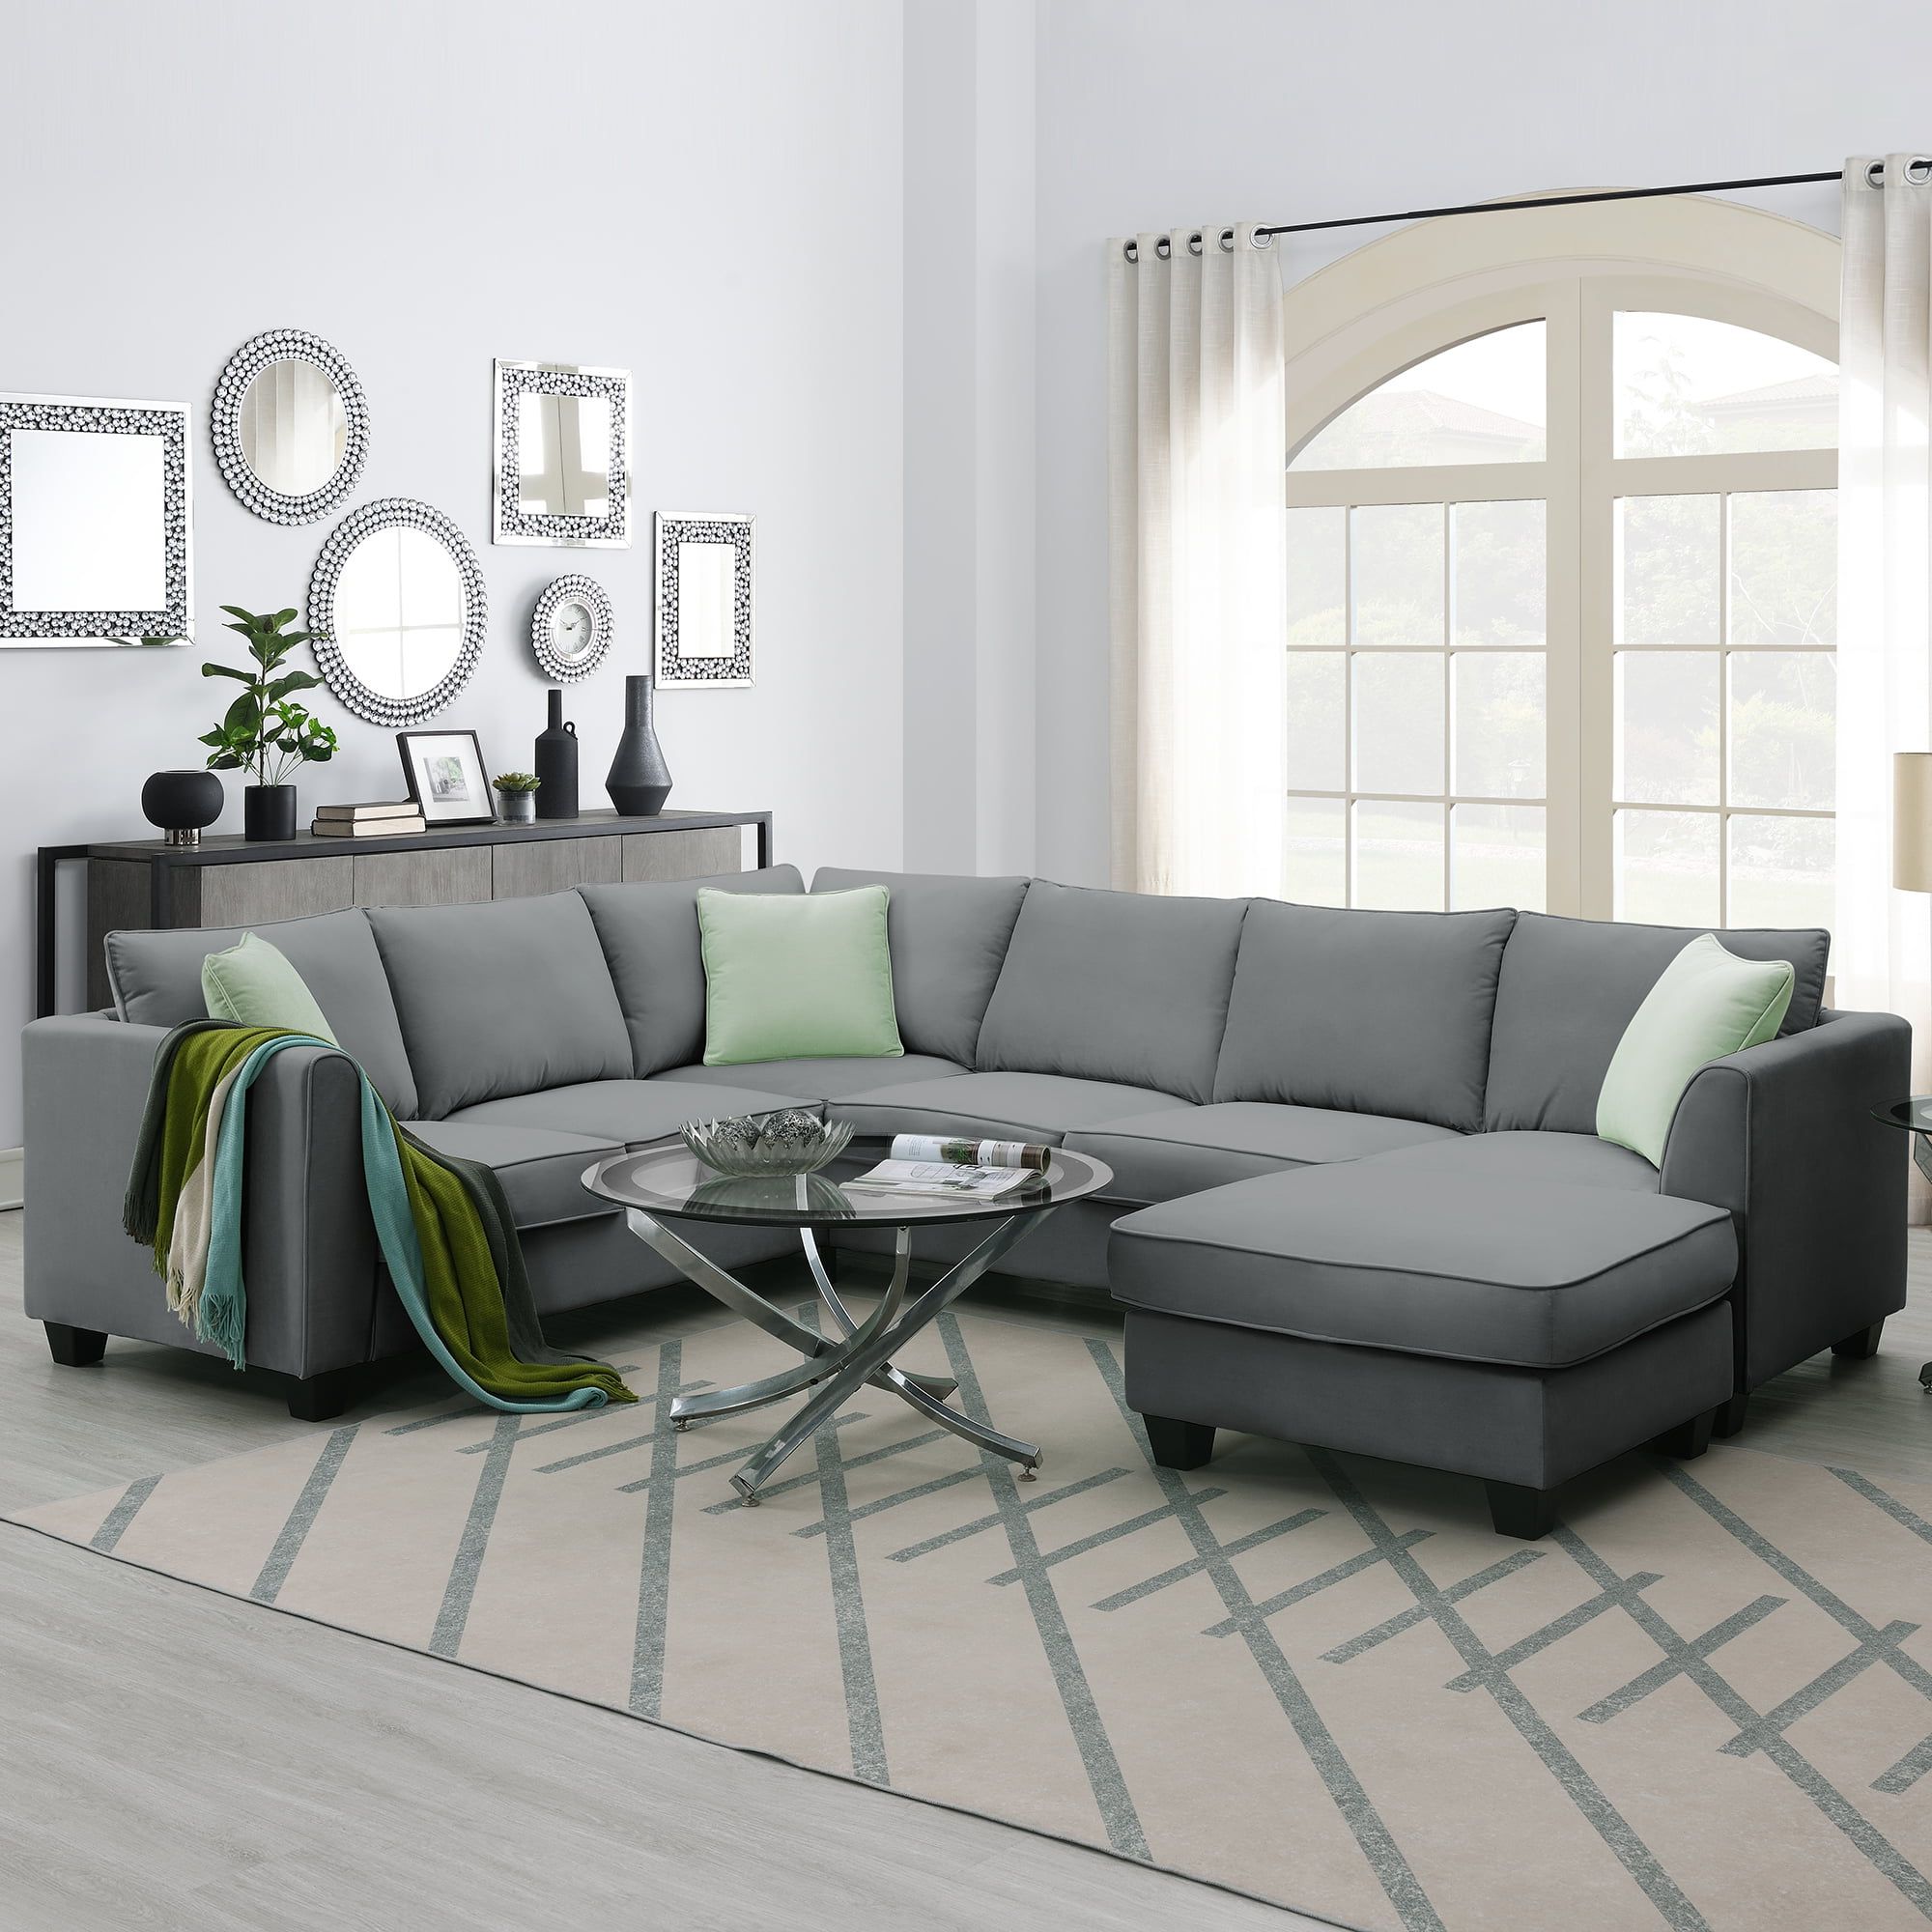 L Shaped Modular Sectional Couch, Kamida 7 Seater Sectional Couch With  Ottoman And 3 Pillows, Modern L Shaped Fabric Upholstered Couch Furniture, Heavy  Duty Sectional Couch For Living Room, Gray – Walmart Inside Heavy Duty Sectional Couches (Gallery 2 of 20)